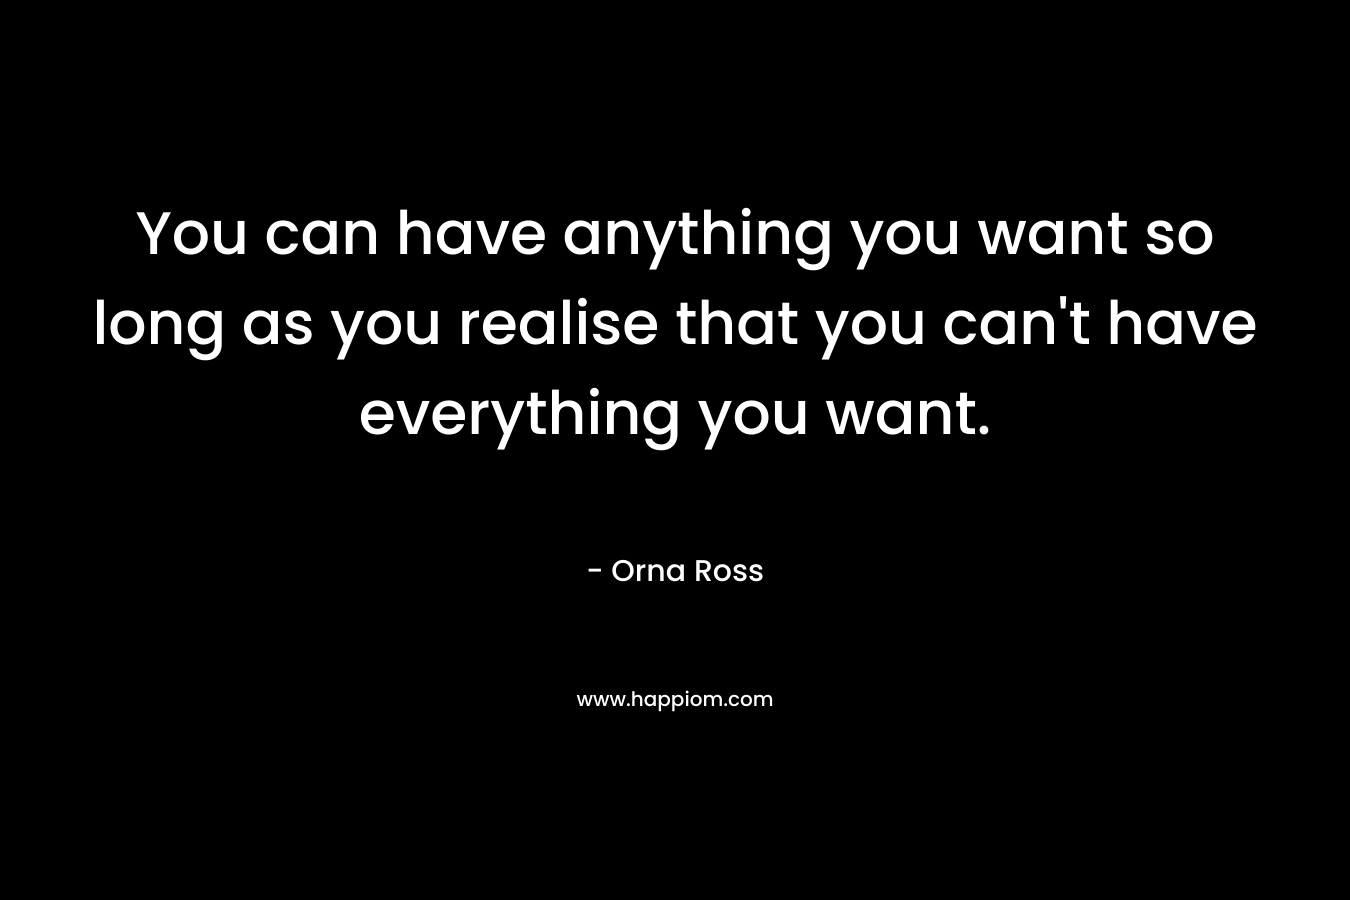 You can have anything you want so long as you realise that you can’t have everything you want. – Orna Ross